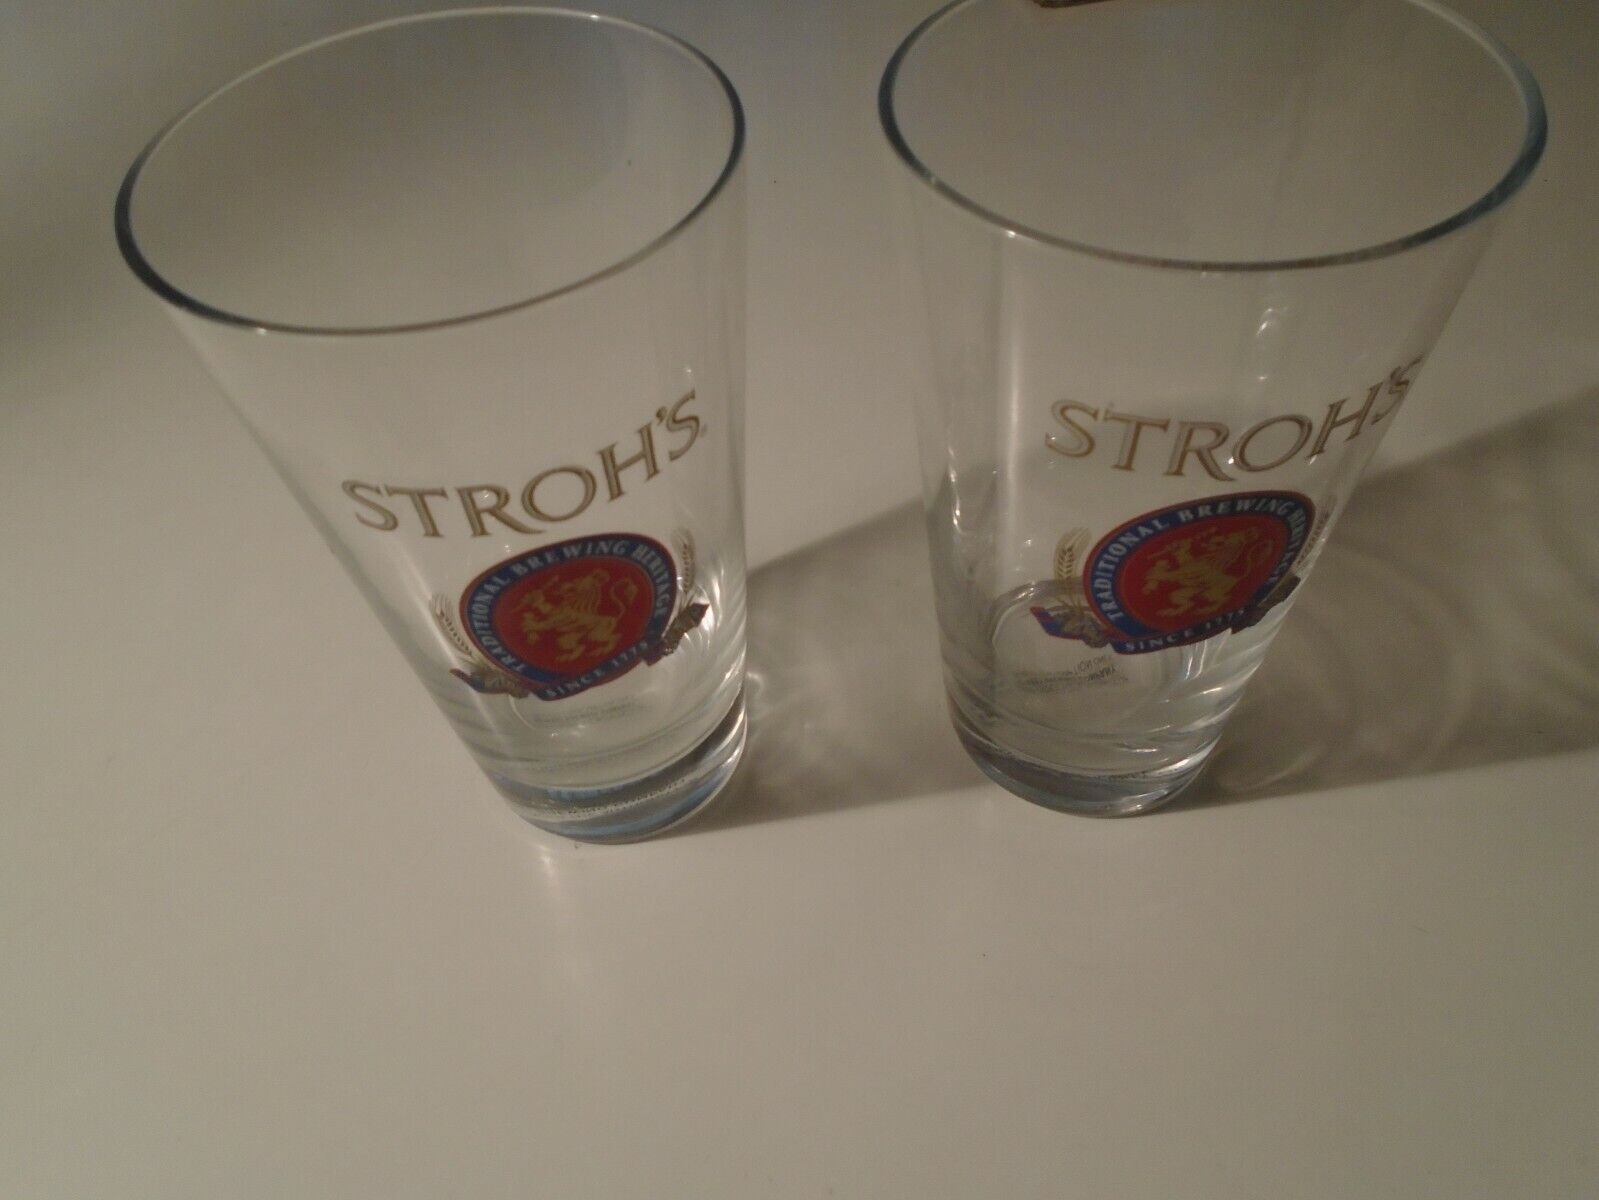 2 Vintage 5 1/4" STROH'S BEER GLASS Fire-Brewed Beer traditional brewing heritag Stroh's